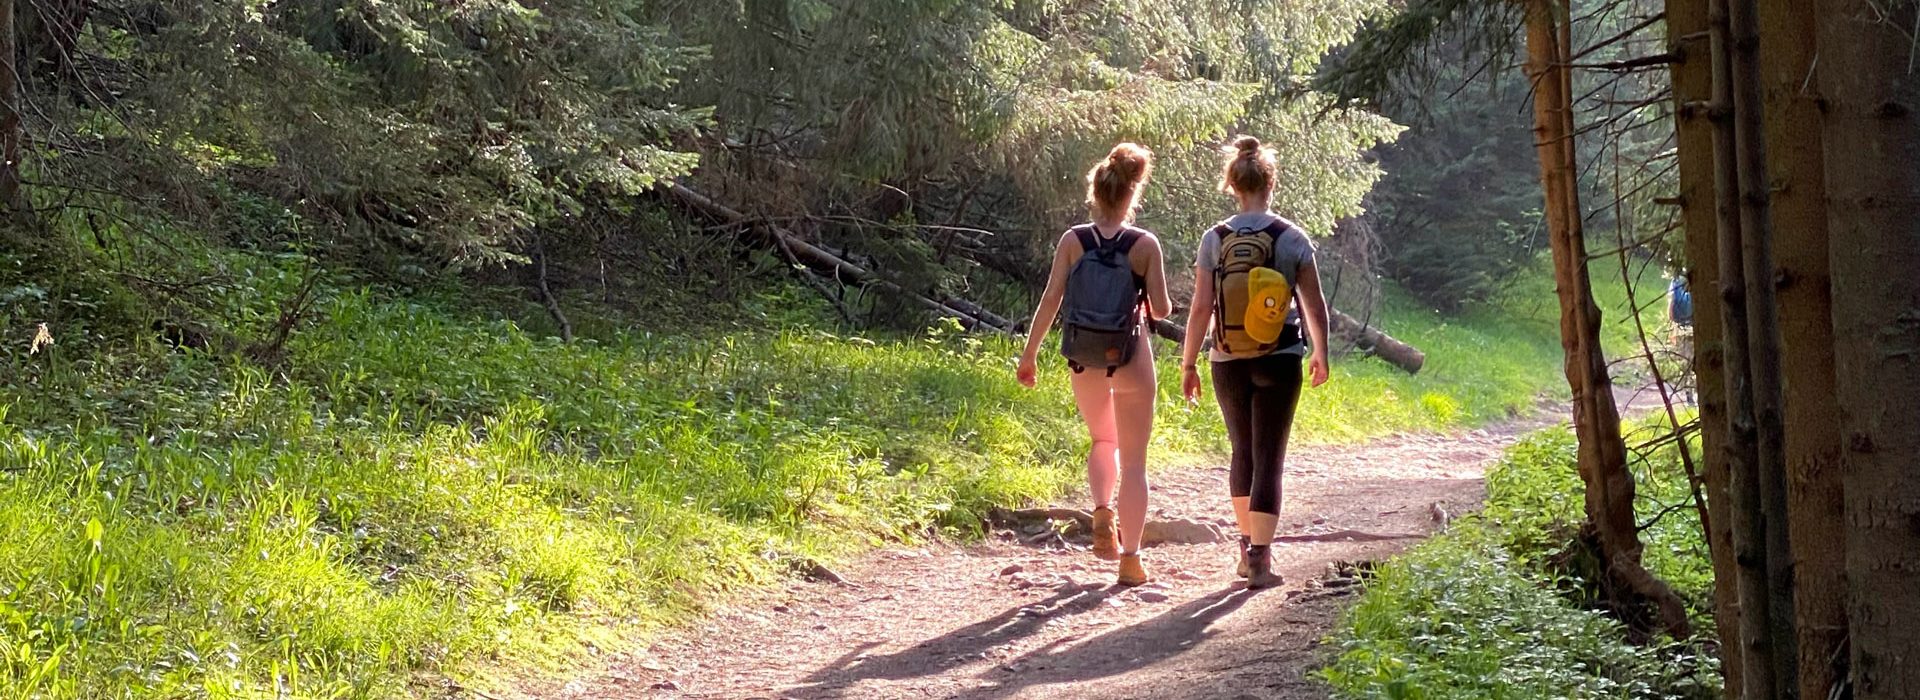 Two people on a hike